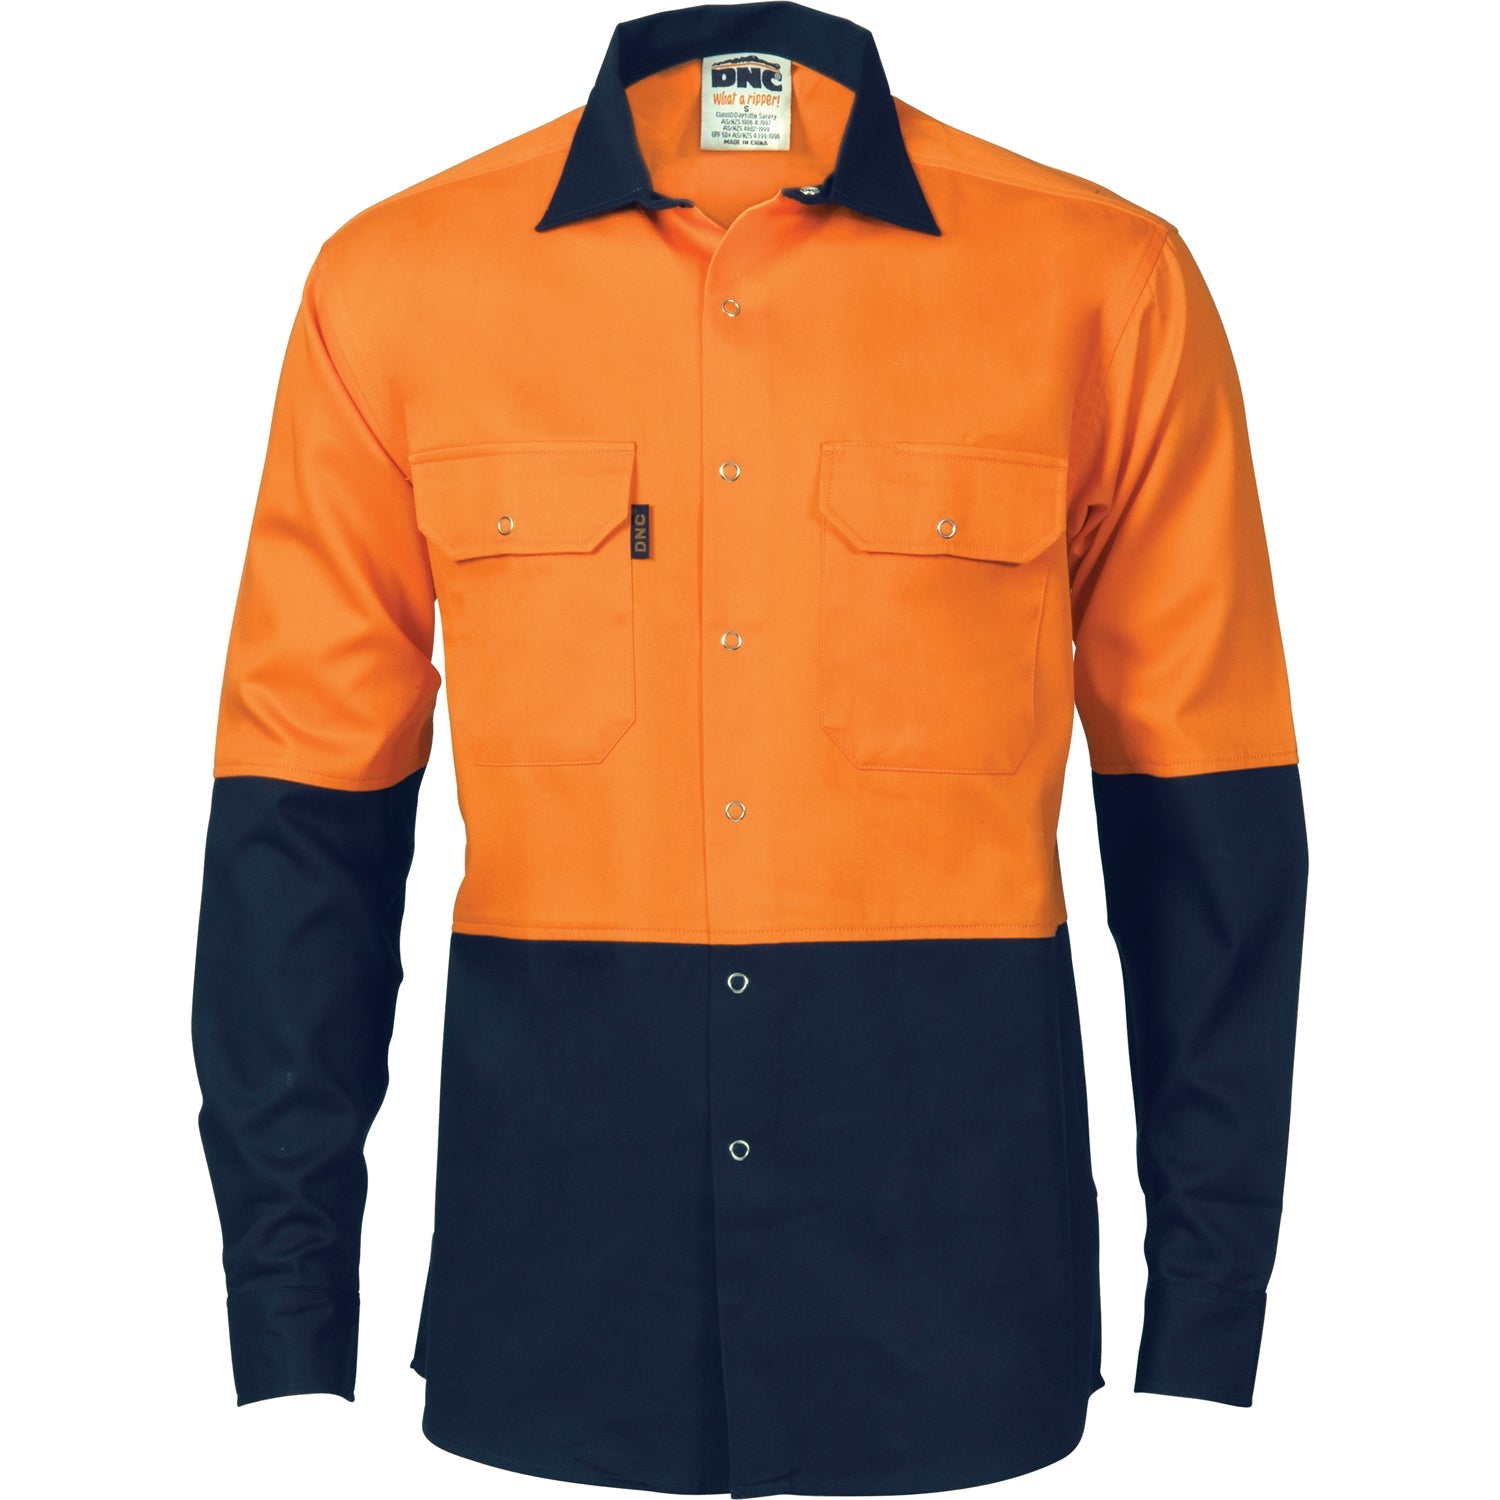 Dnc 3838 Hivis Two Tone Drill Shirt With Press Studs